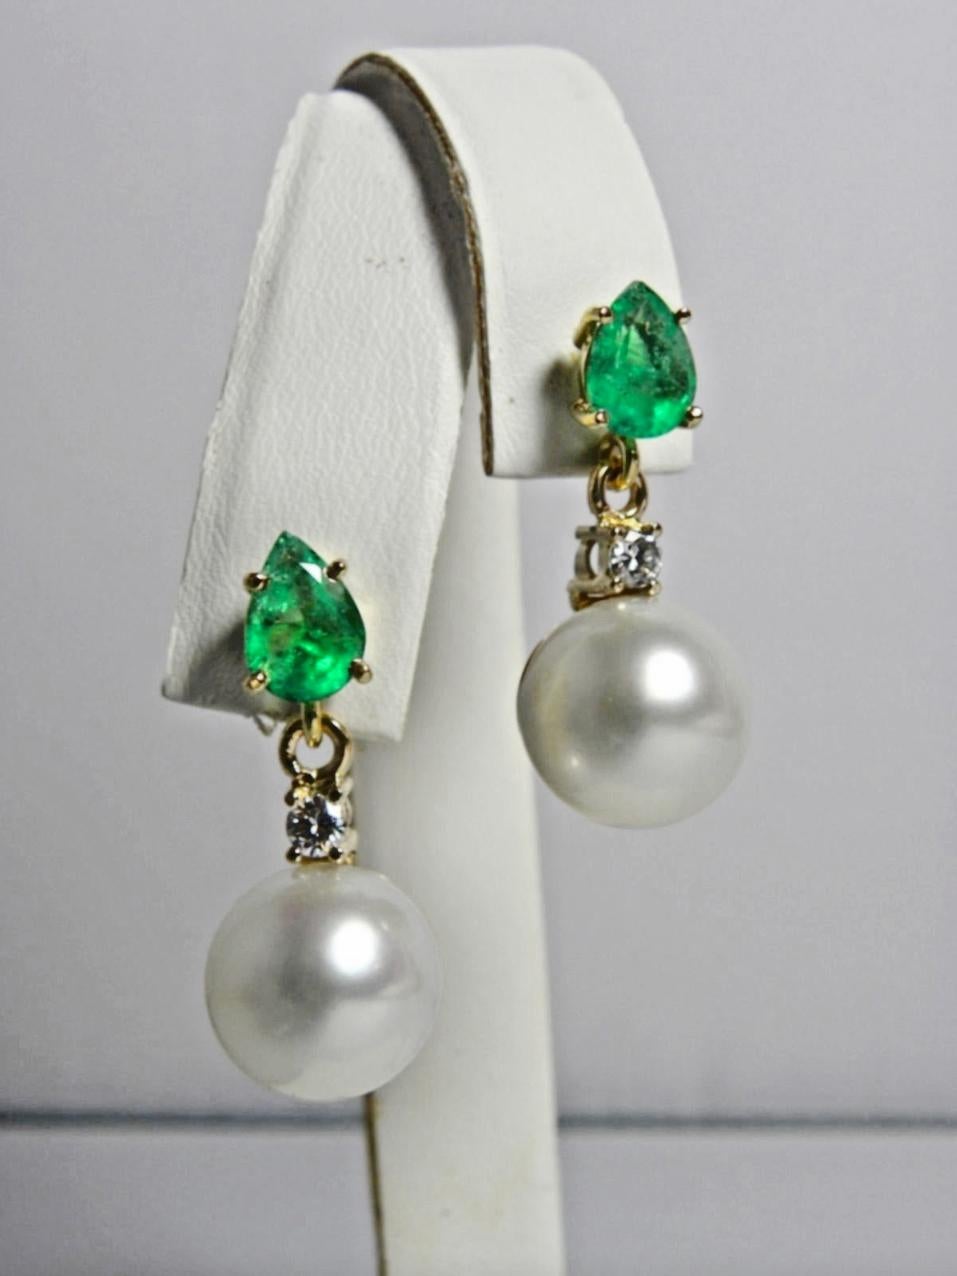 Stunning Natural Colombian Emerald Diamond and Pearl Drop Dangle Earrings 18K
100% Natural Colombian Emeralds (Minor Oiled) Pear Cut  AAA Medium Green/ Clarity, VS/SI 
Total Emeralds Weight: 2.24 Carats (2 Emeralds)
Emeralds Measurements:  Approx.